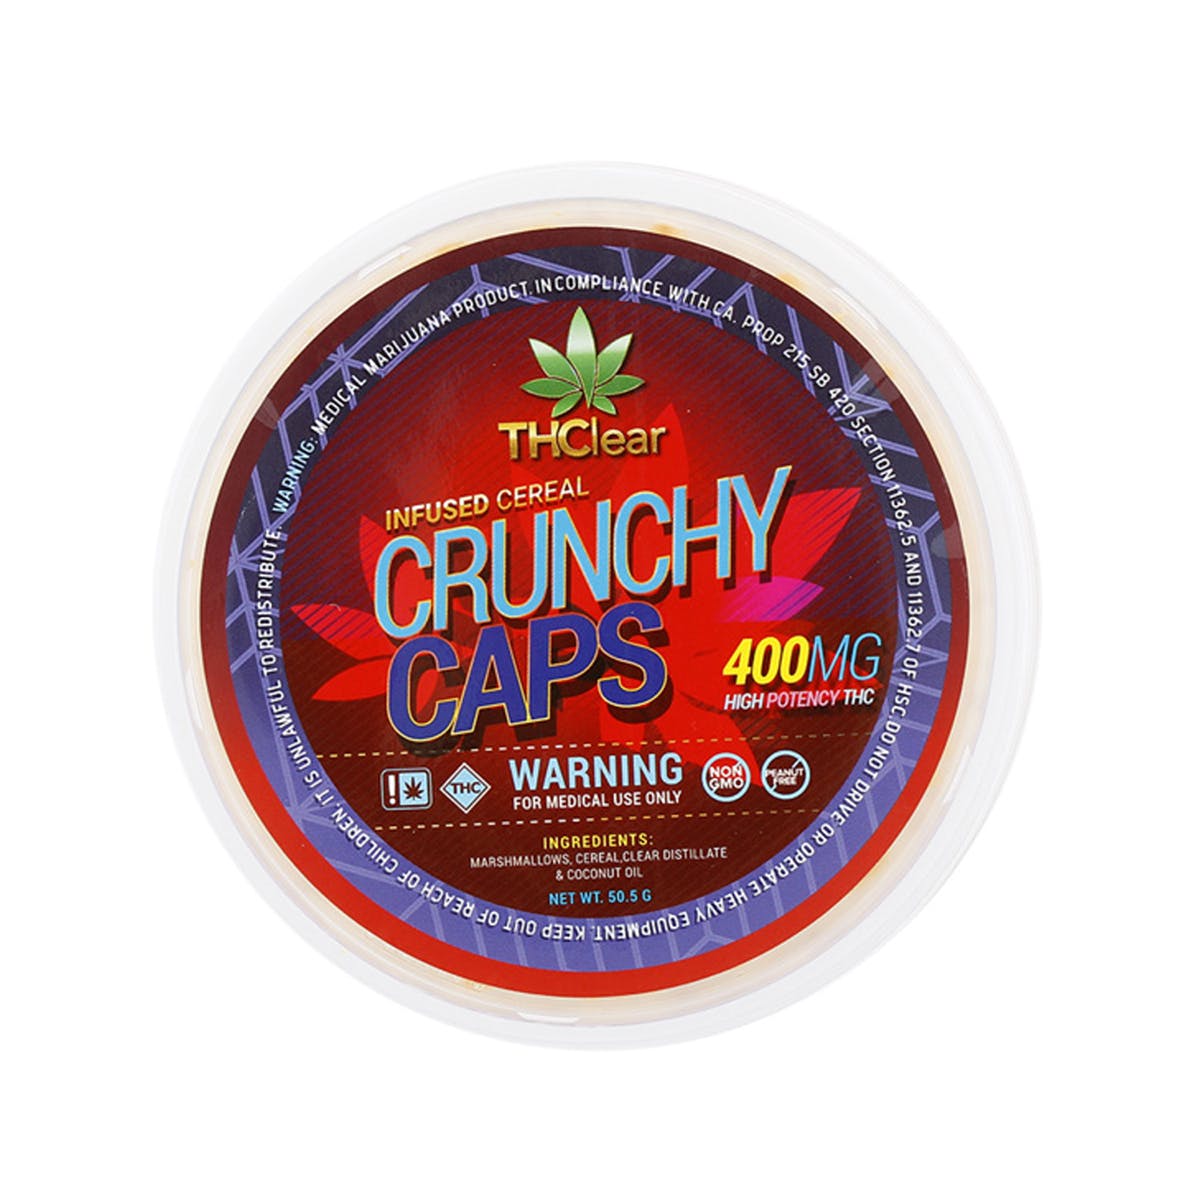 Crunchy Caps Cereal 400mg